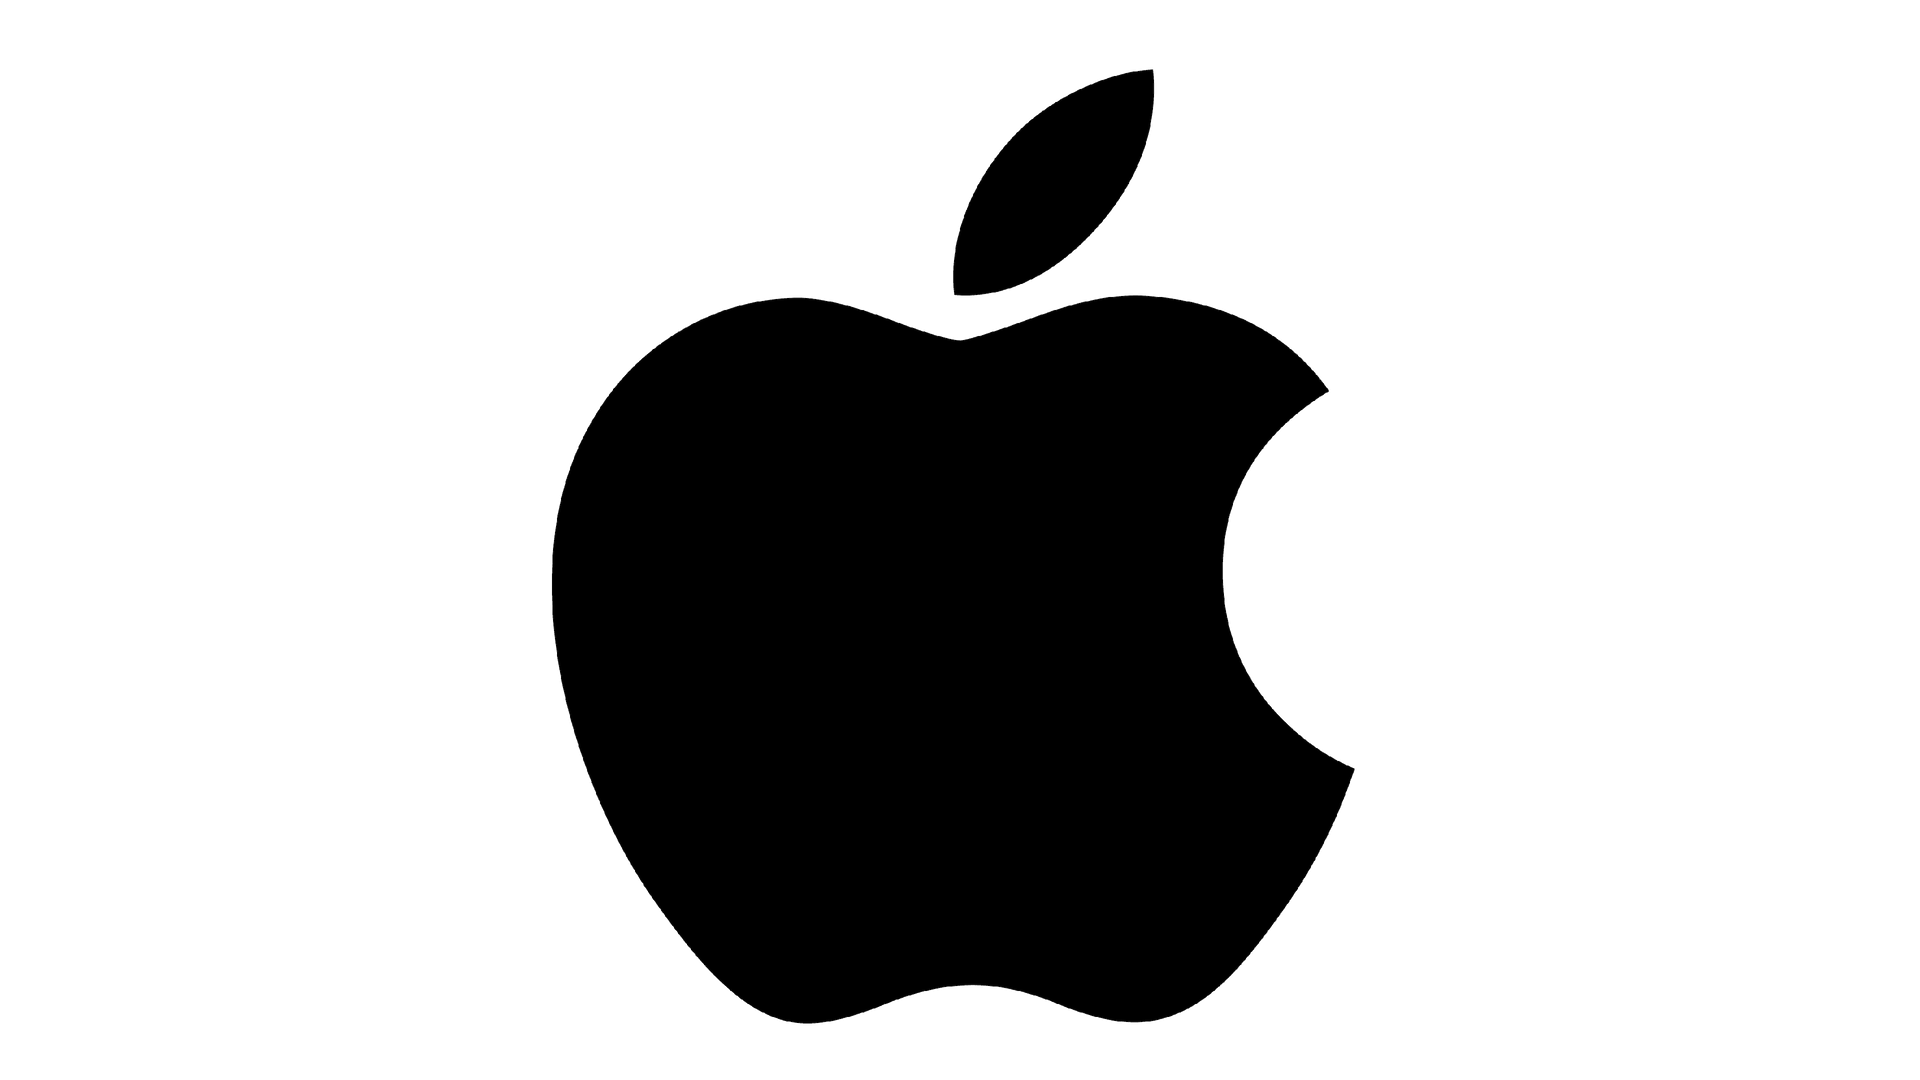 A black apple logo with a bite taken out of it on a white background.